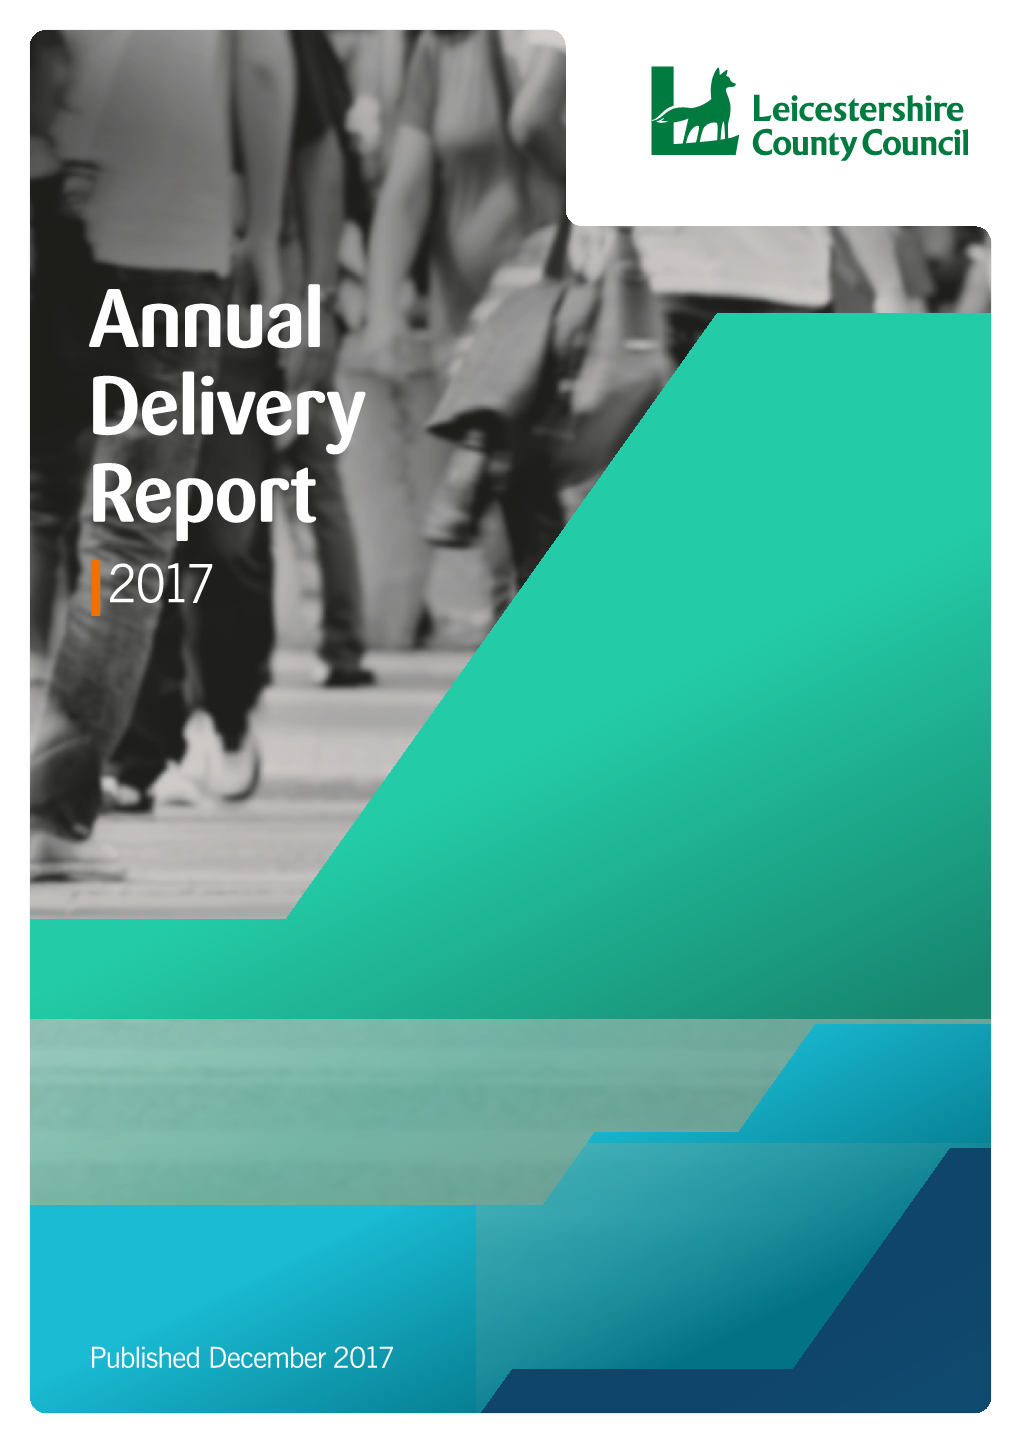 Annual Delivery Report 2017